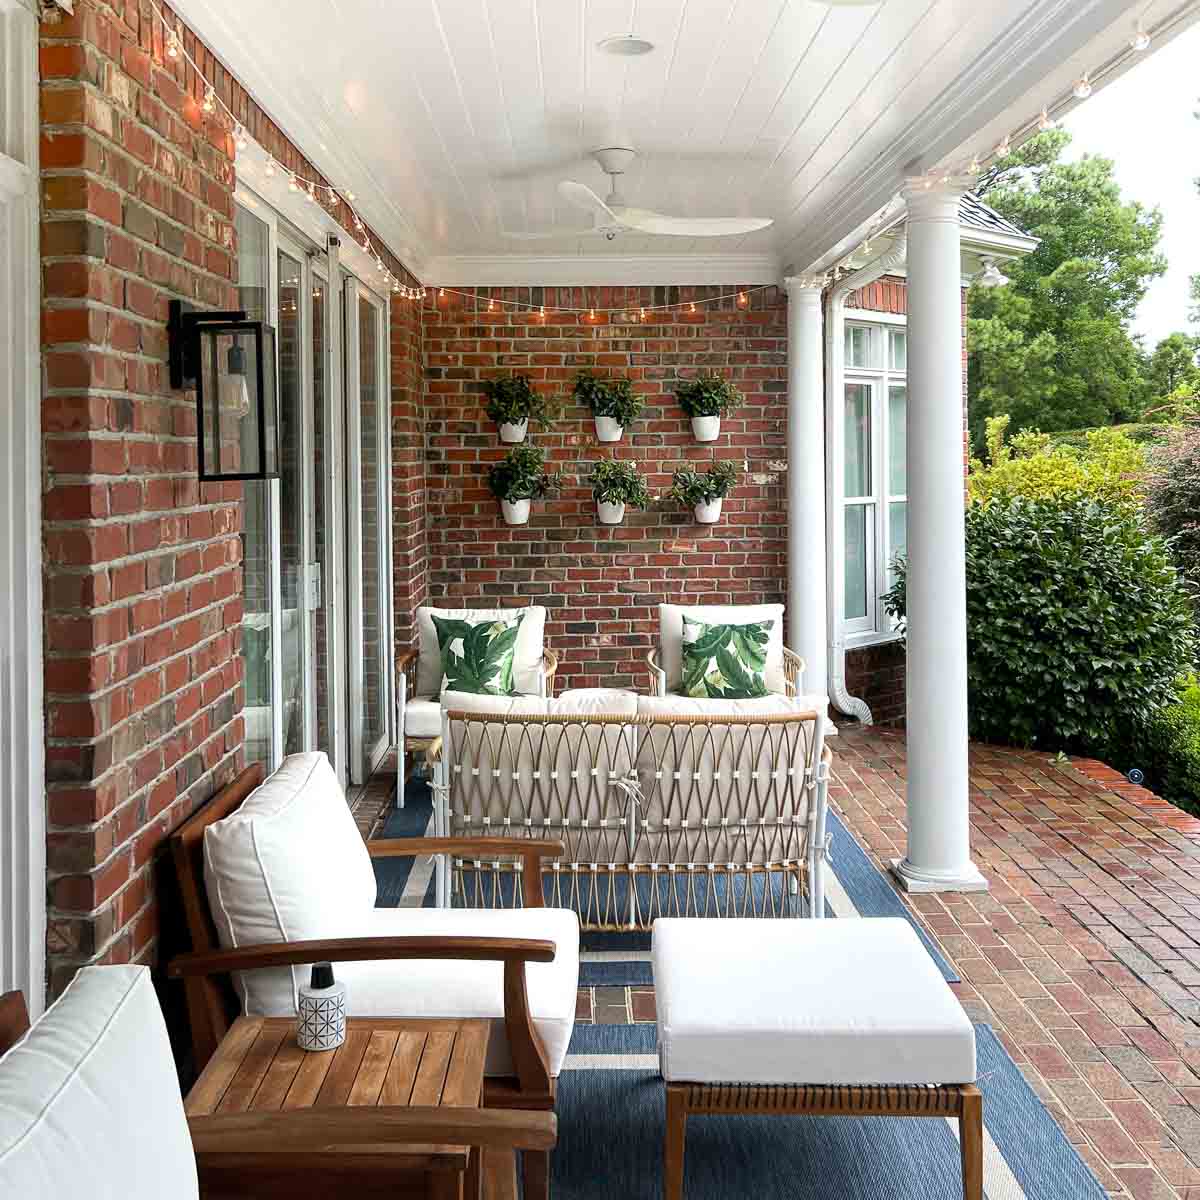 Tips on Adding String Lights to Your Outdoor Living Space! - Driven by Decor